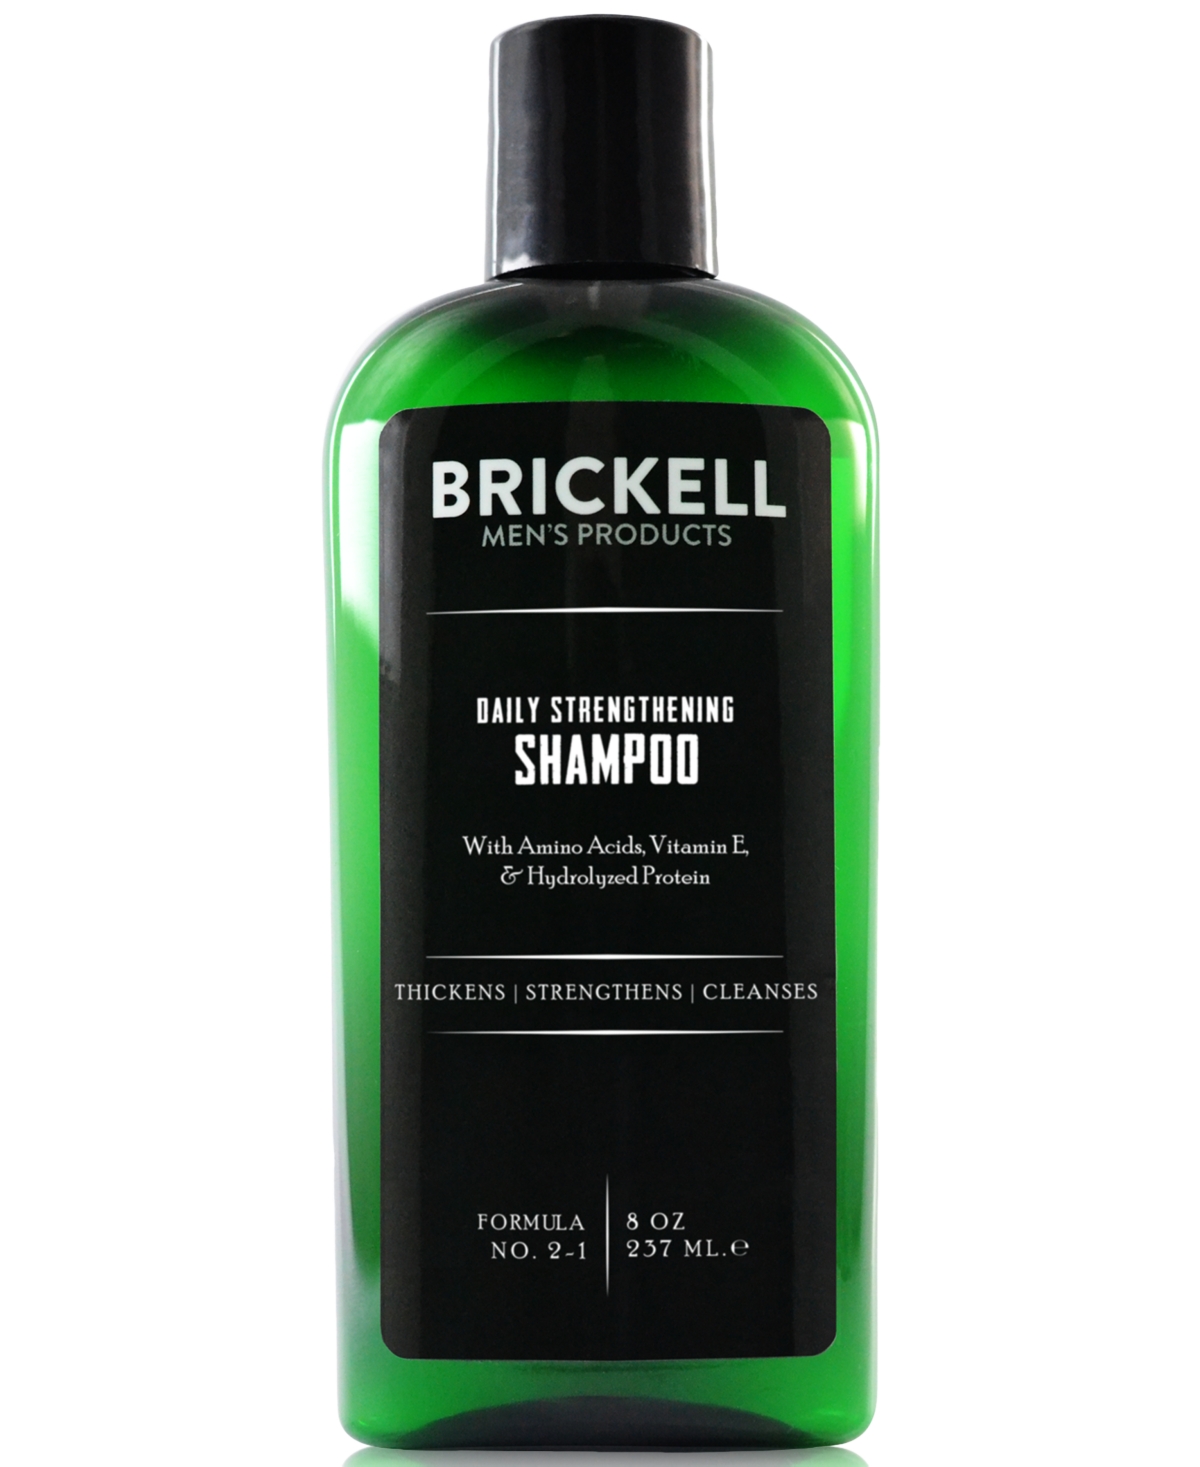 Brickell Men's Products Daily Strengthening Shampoo, 8 oz.